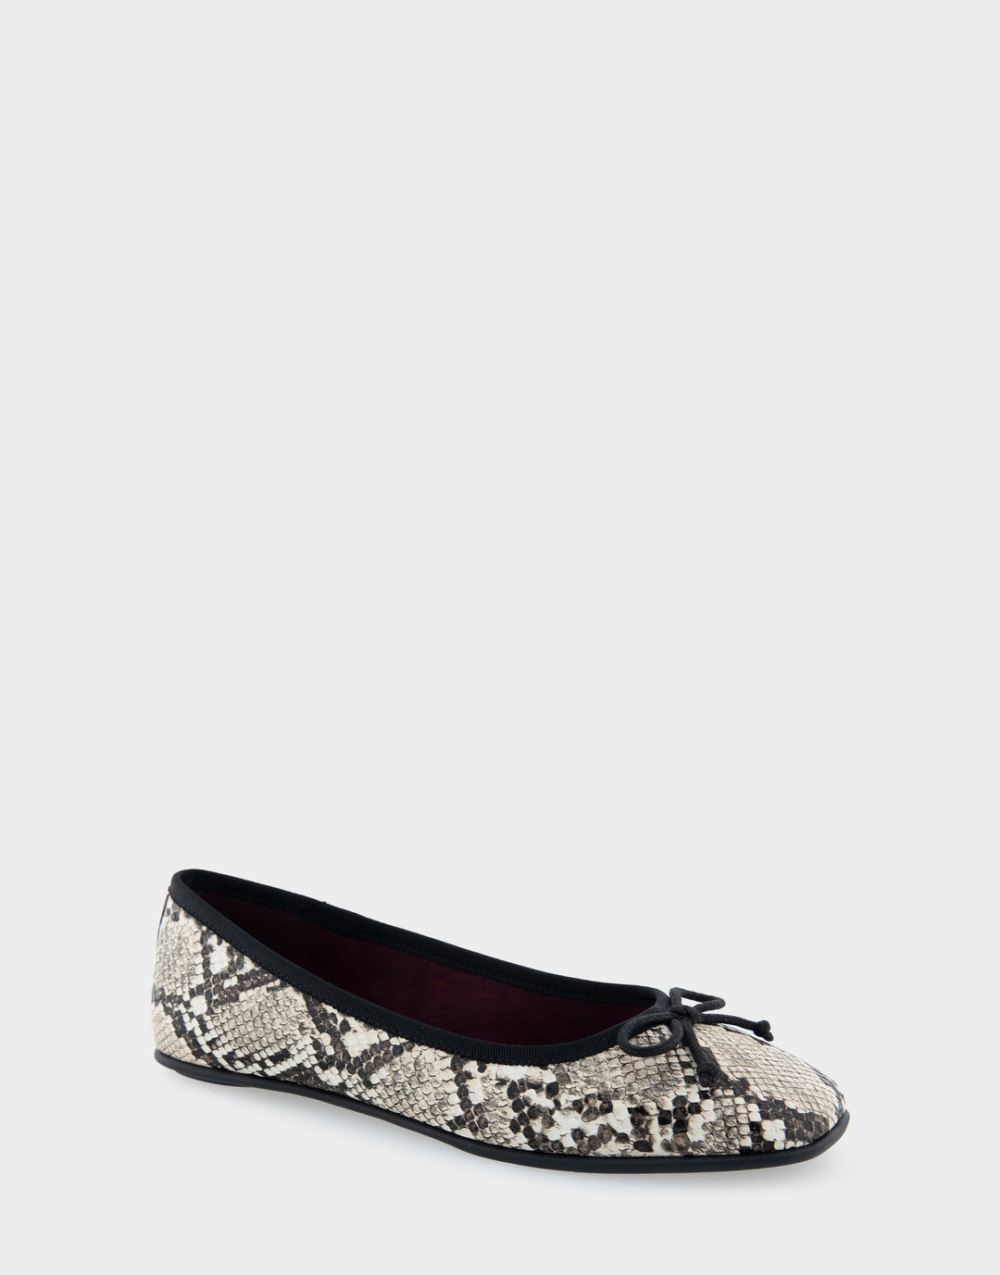 Women's | Catalina Natural Printed Snake Faux Leather Ballet Flat